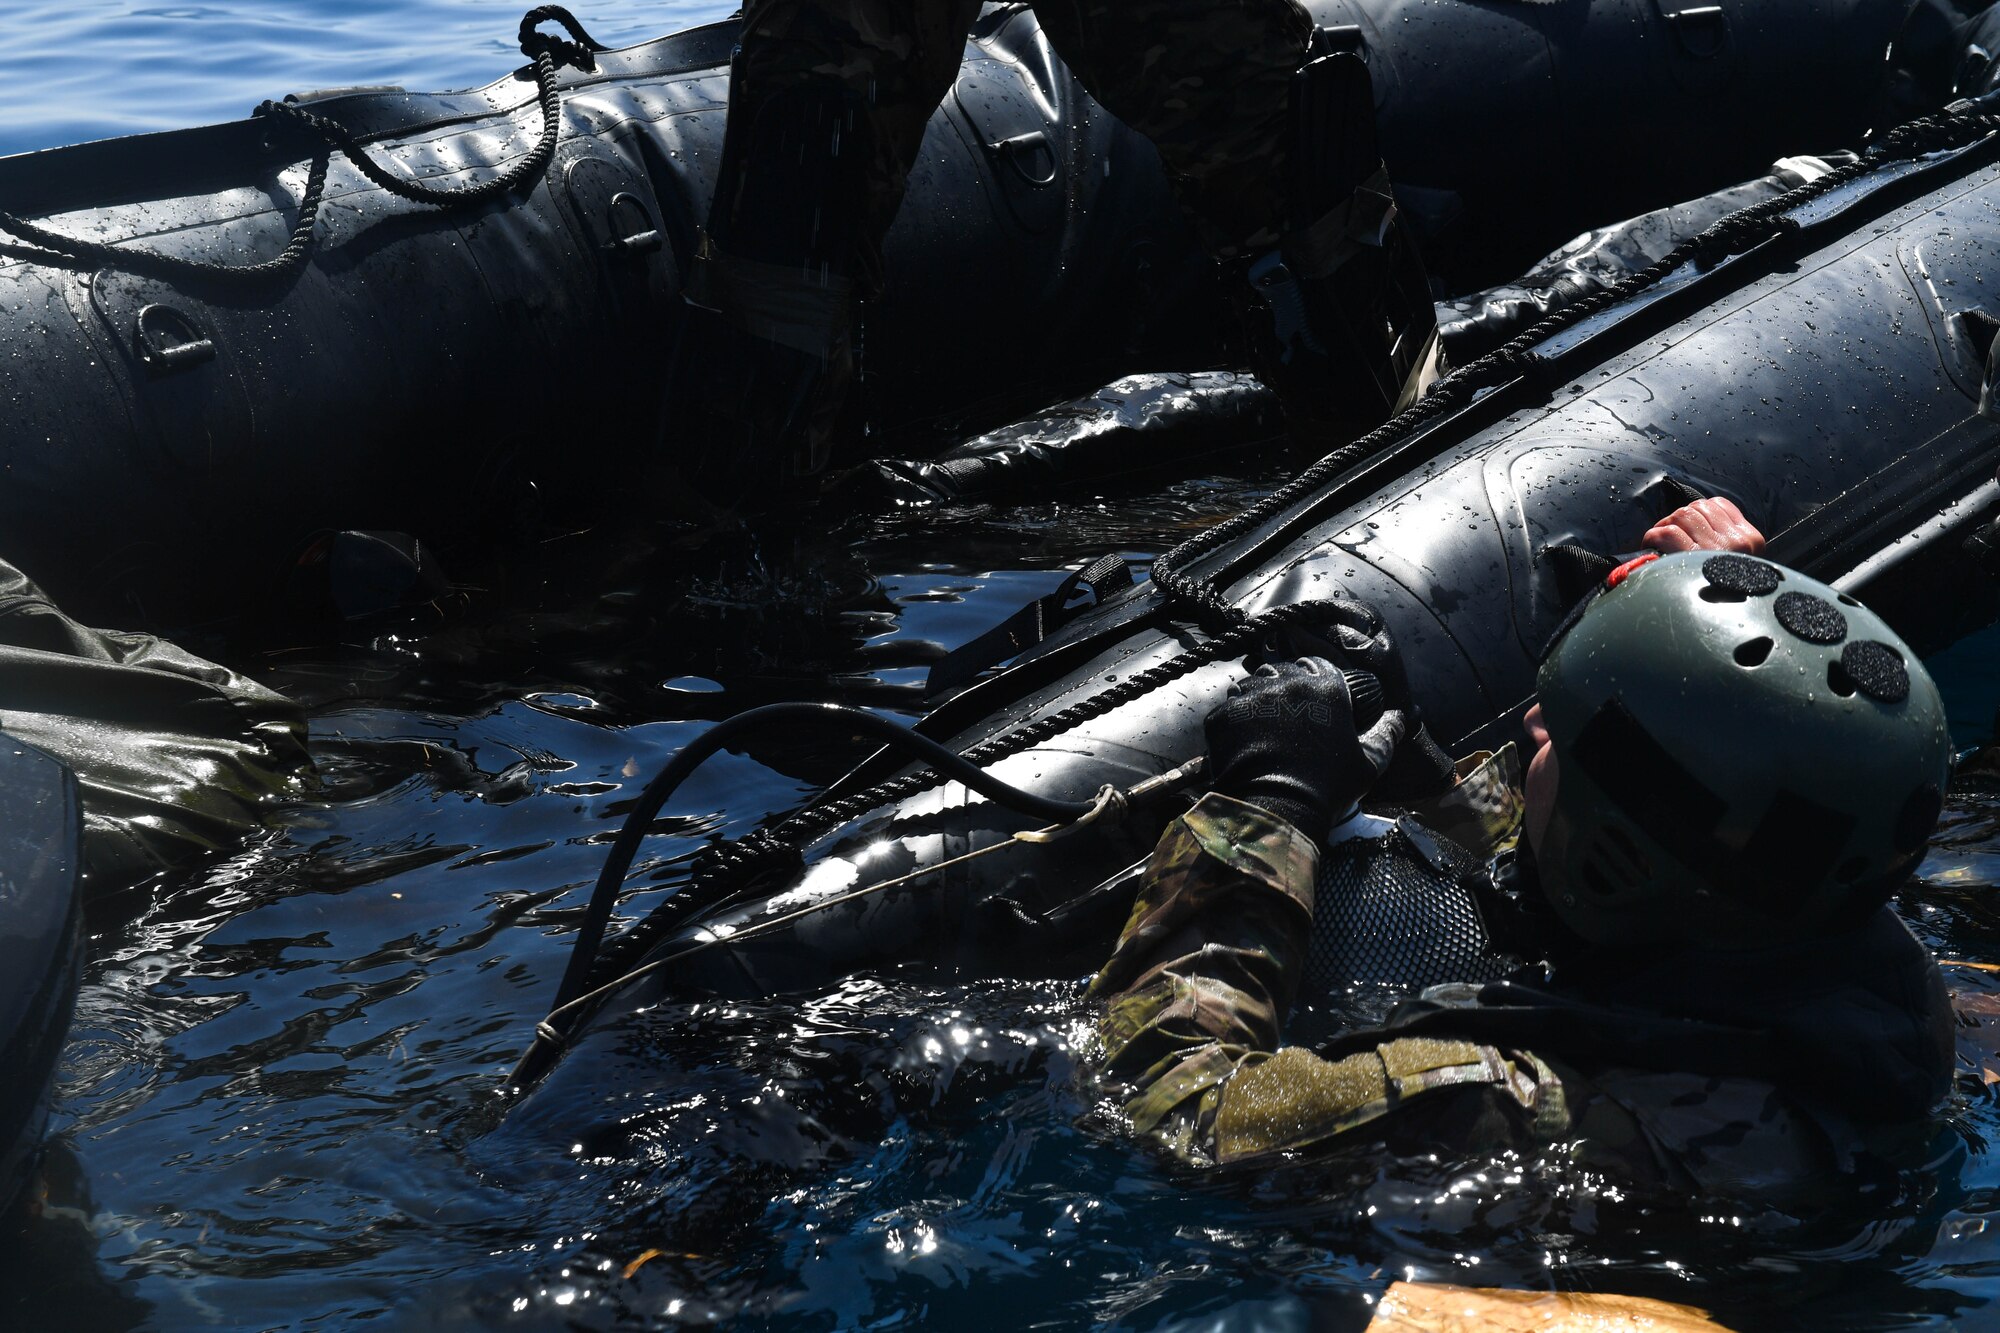 A Greek paratrooper inflates a Zodiac raft during Exercise Stolen Cerberus IV near Elefsis Air Base, Greece, April 27, 2017. The raft and six Greek paratroopers were dropped from a U.S. Air Force C-130J Super Hercules into the Mediterranean Sea. Approximately 110 Airmen and three C-130s from the 86th Airlift Wing’s 37th AS, Ramstein Air Base, Germany, participated in Exercise Stolen Cerberus IV with the Hellenic air force and the U.S. Army from April 18 to 28. (U.S Air Force photo by Senior Airman Tryphena Mayhugh)